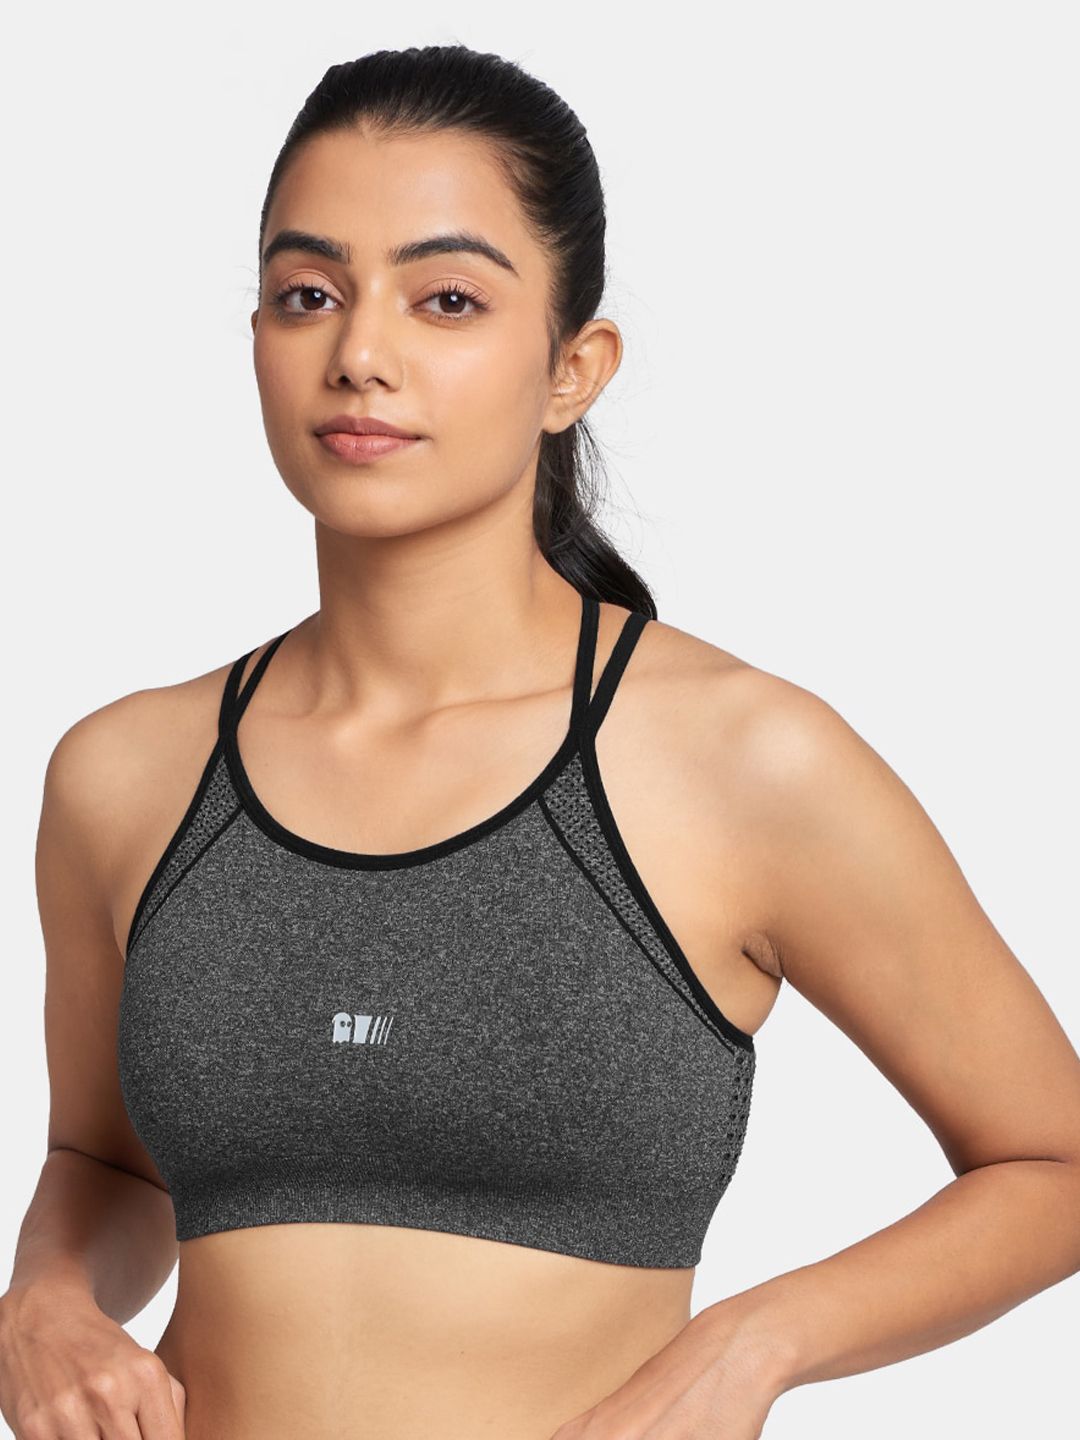 The Souled Store Charcoal Grey Workout Bra Price in India